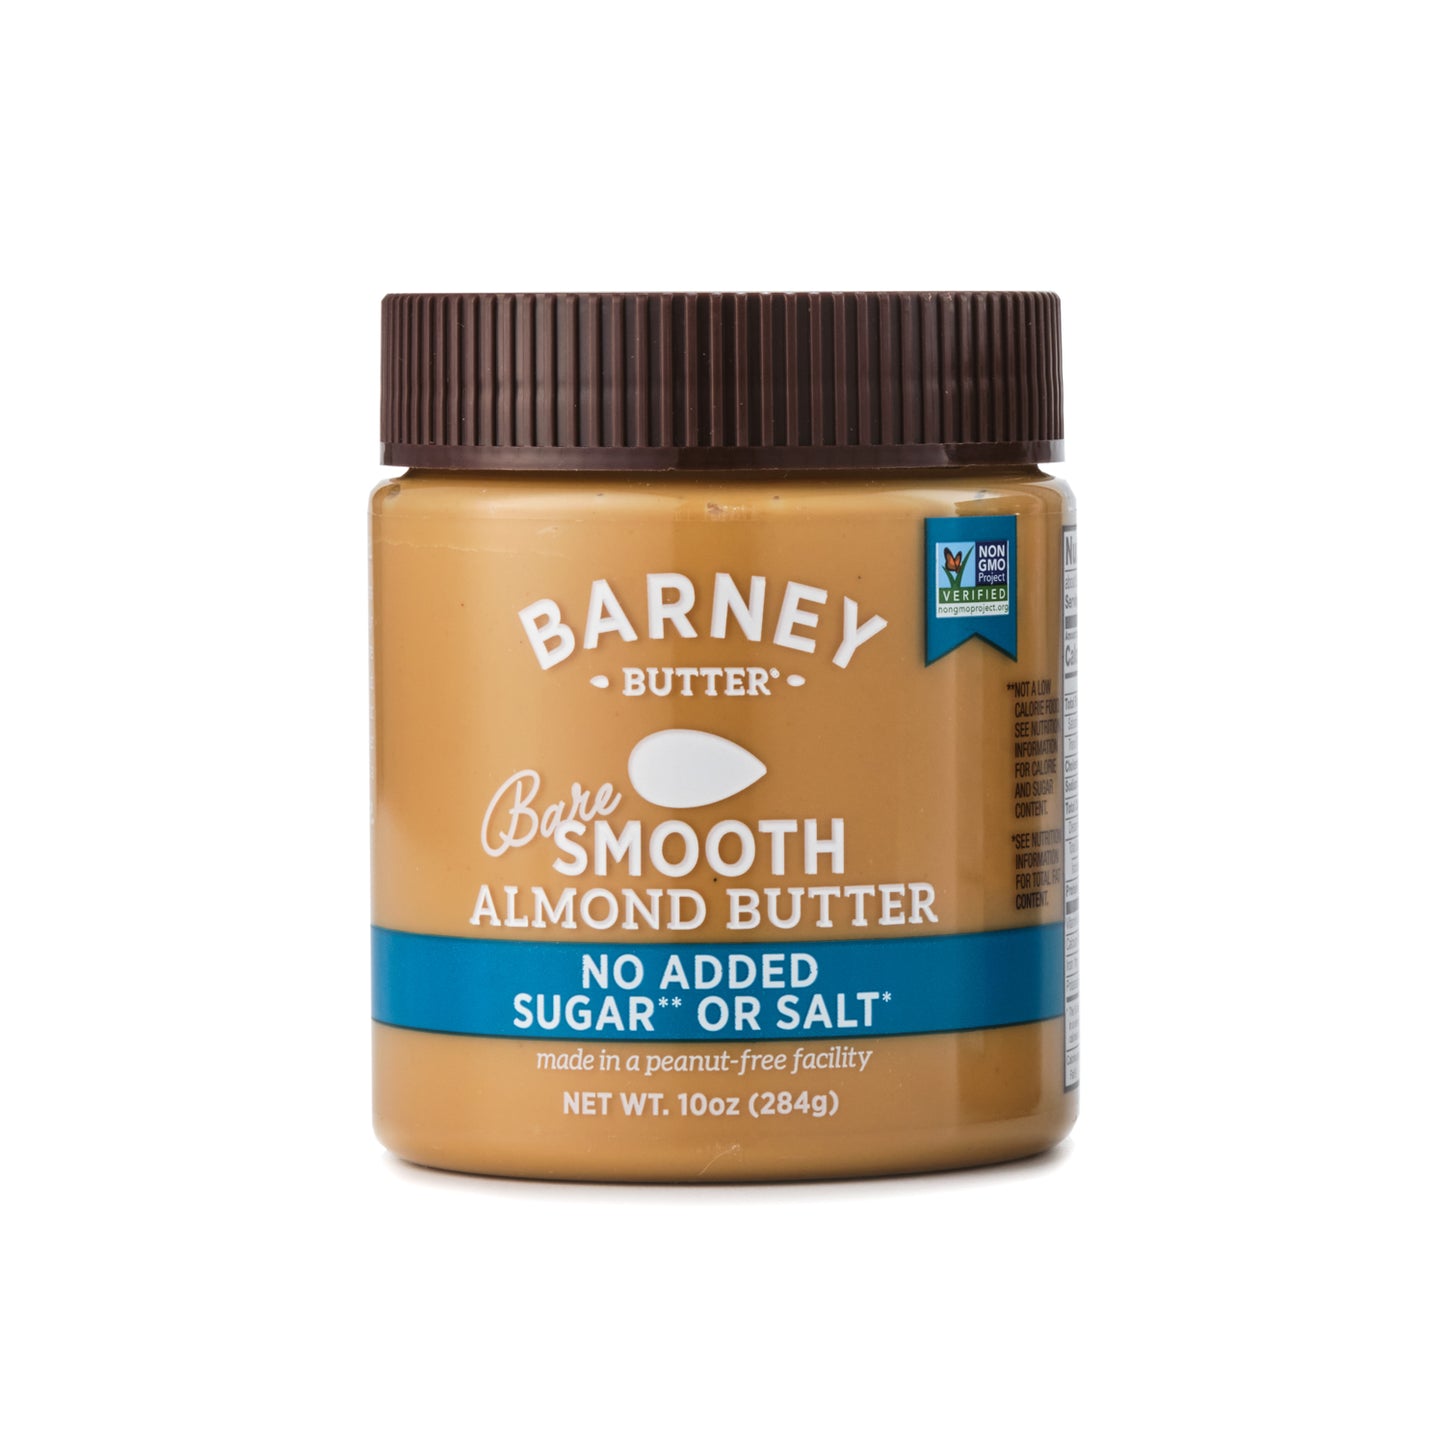 Barney Butter Bare Smooth Almond Butter 284g